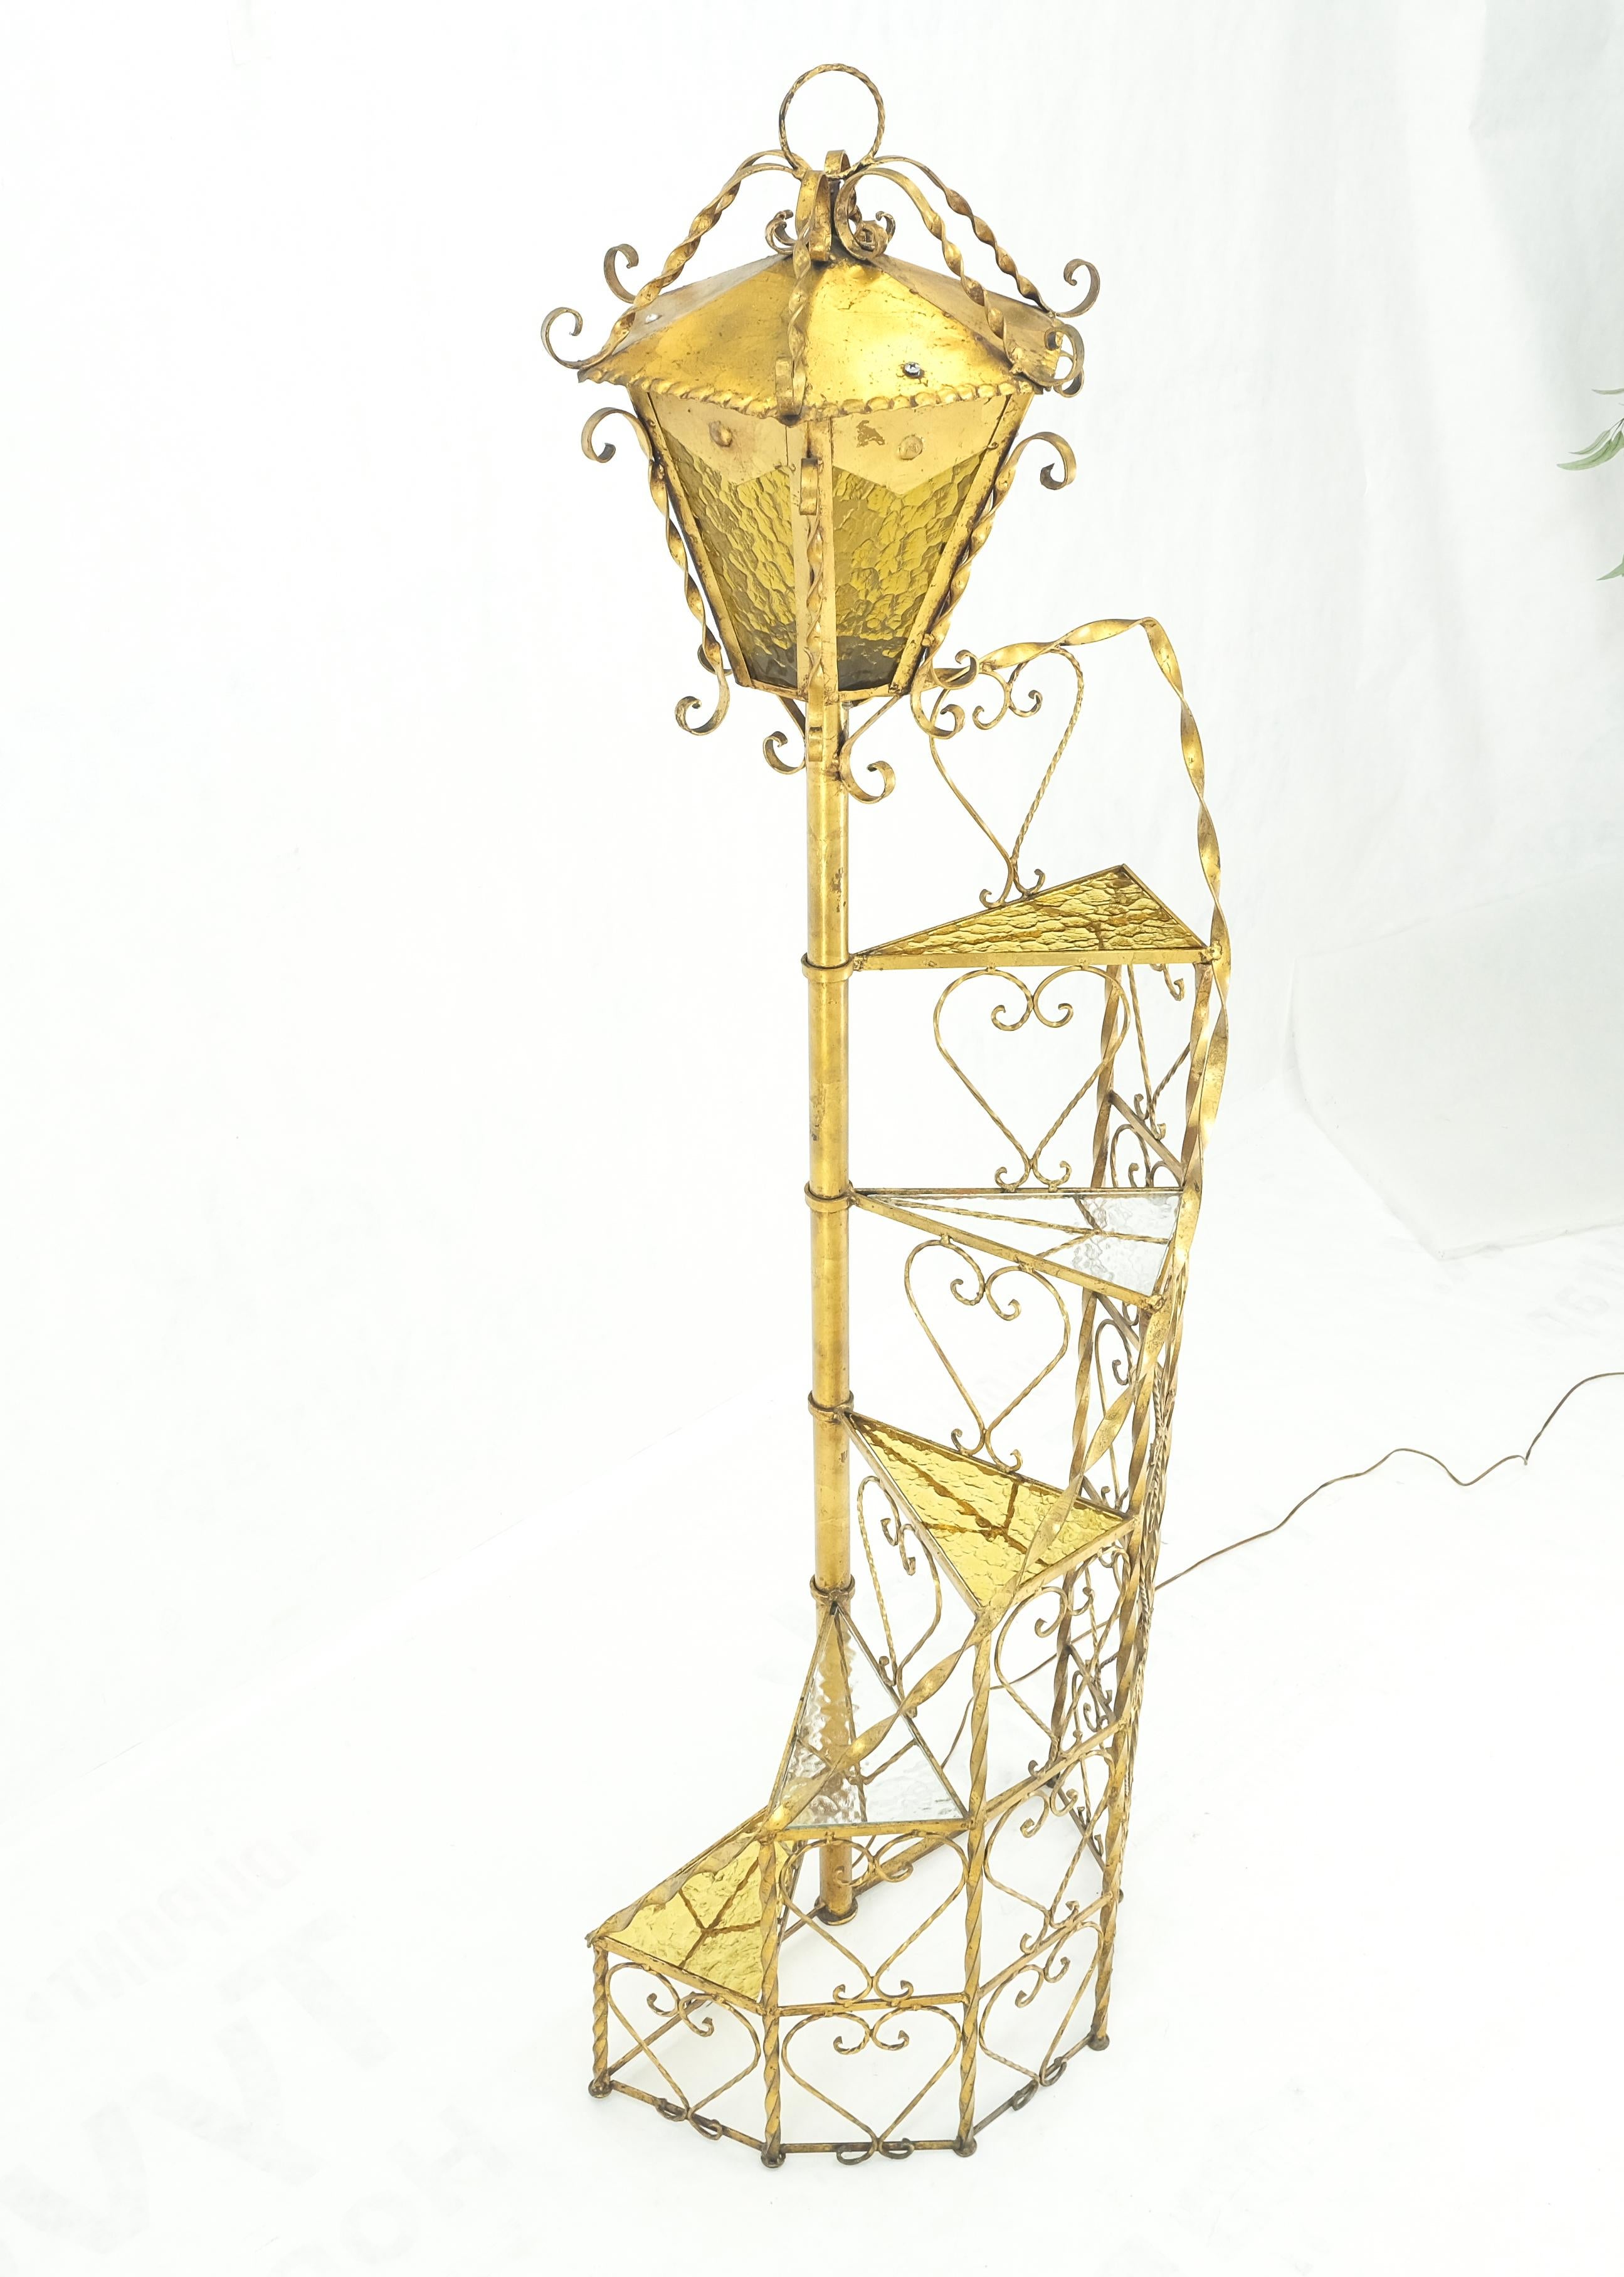 Italian 5 tier Gold Gilt Spiral Plant Stand Floor Lamp Lantern Shade Decorative MINT! For Sale